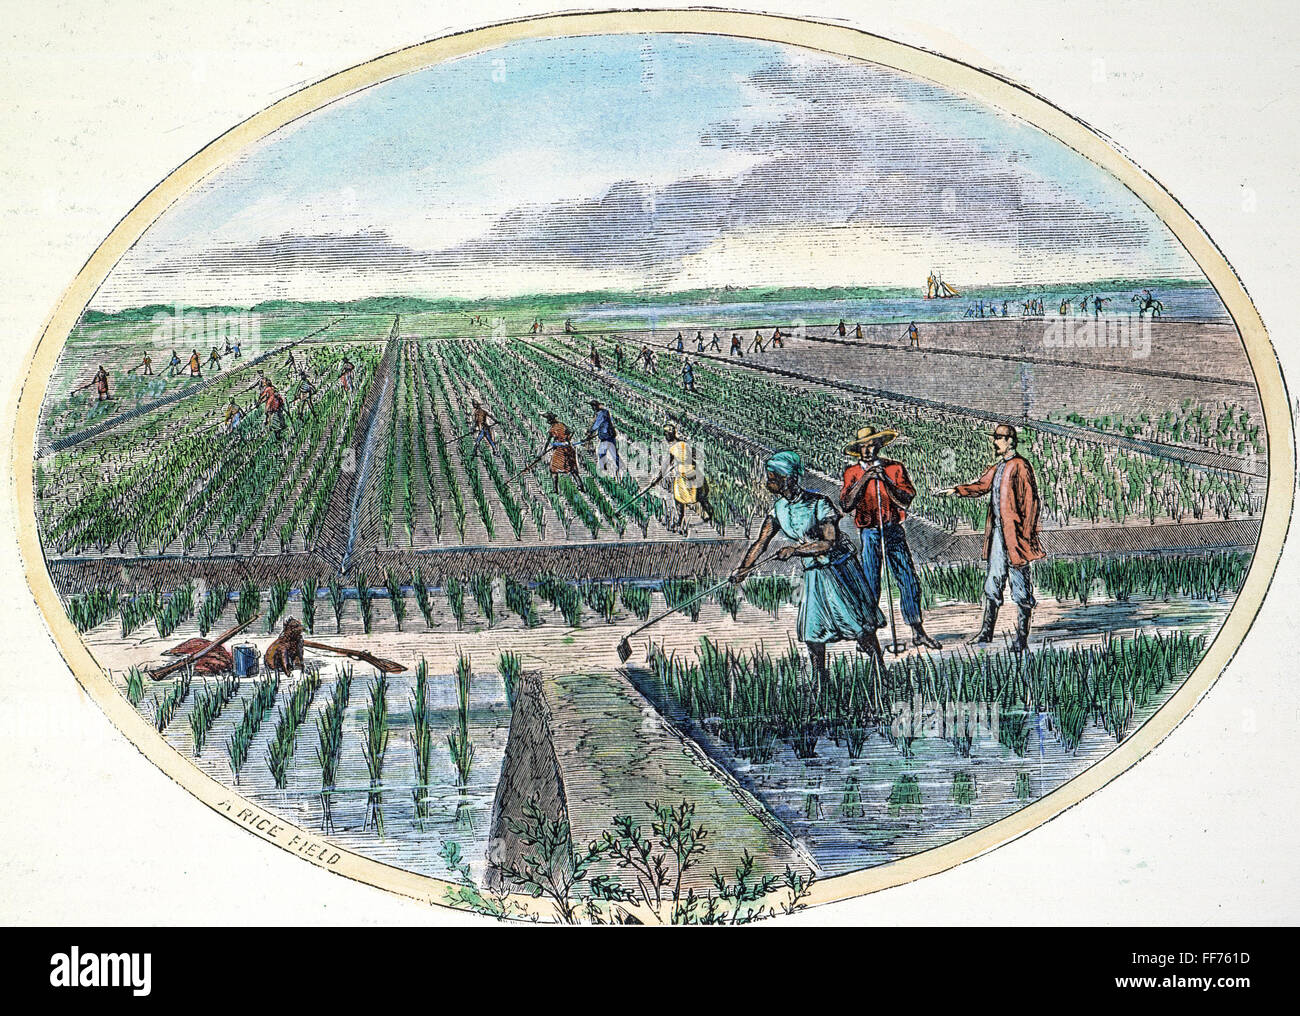 RICE PLANTATION, 1867. /nRice culture in the American South. Engraving, 1867. Stock Photo